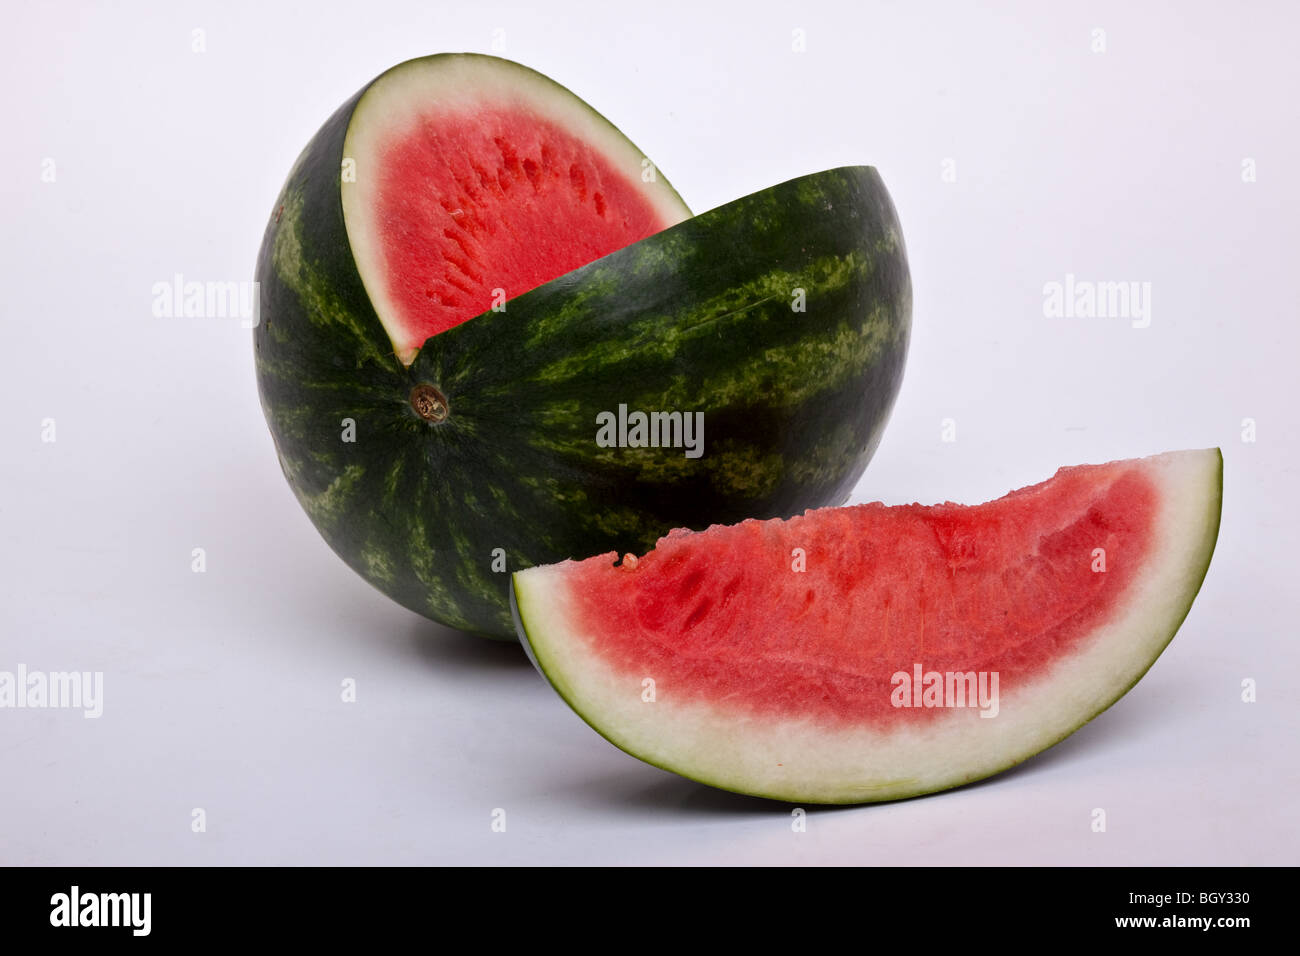 Seedless watermelon (Citrullus lanatus) a sterile hybrid invented 50 years ago Stock Photo